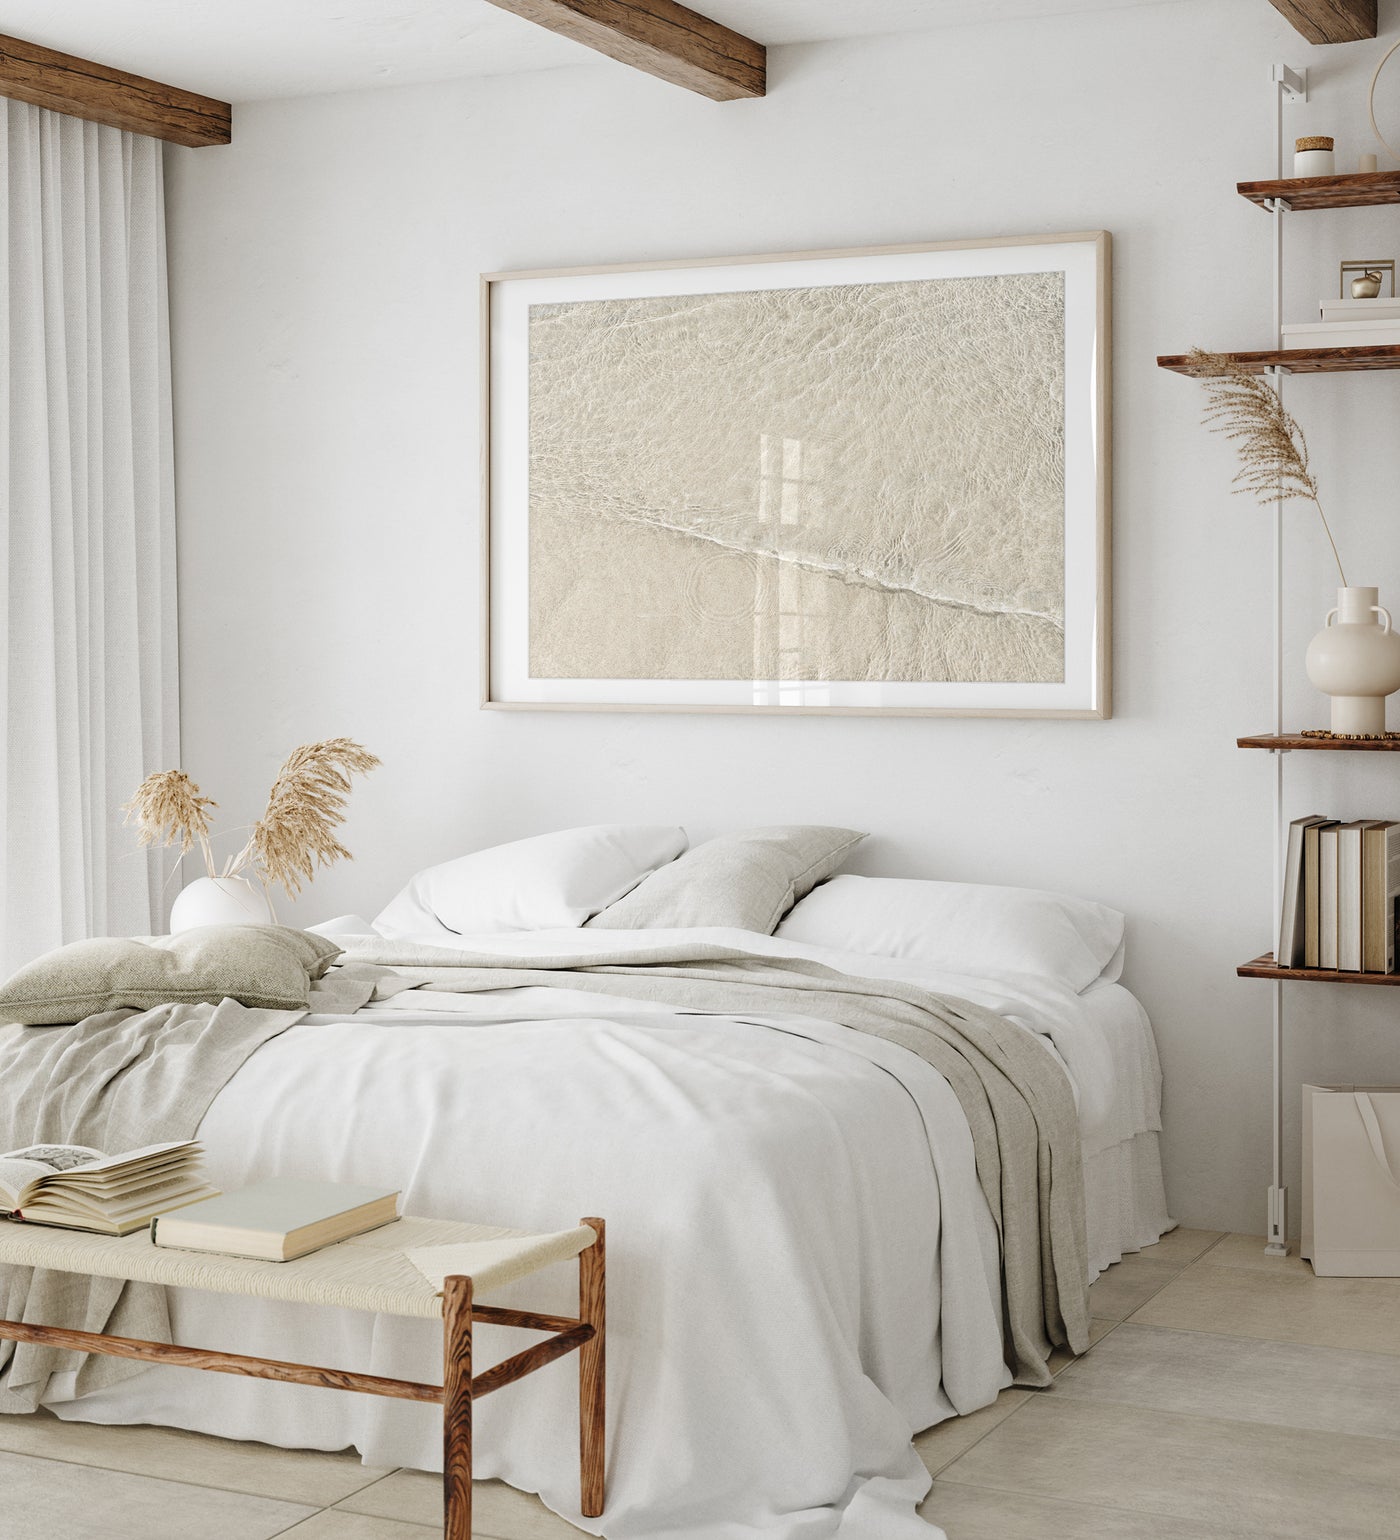 Shallow Water No 9 - Large neutral wall art by Cattie Coyle Photography in bedroom